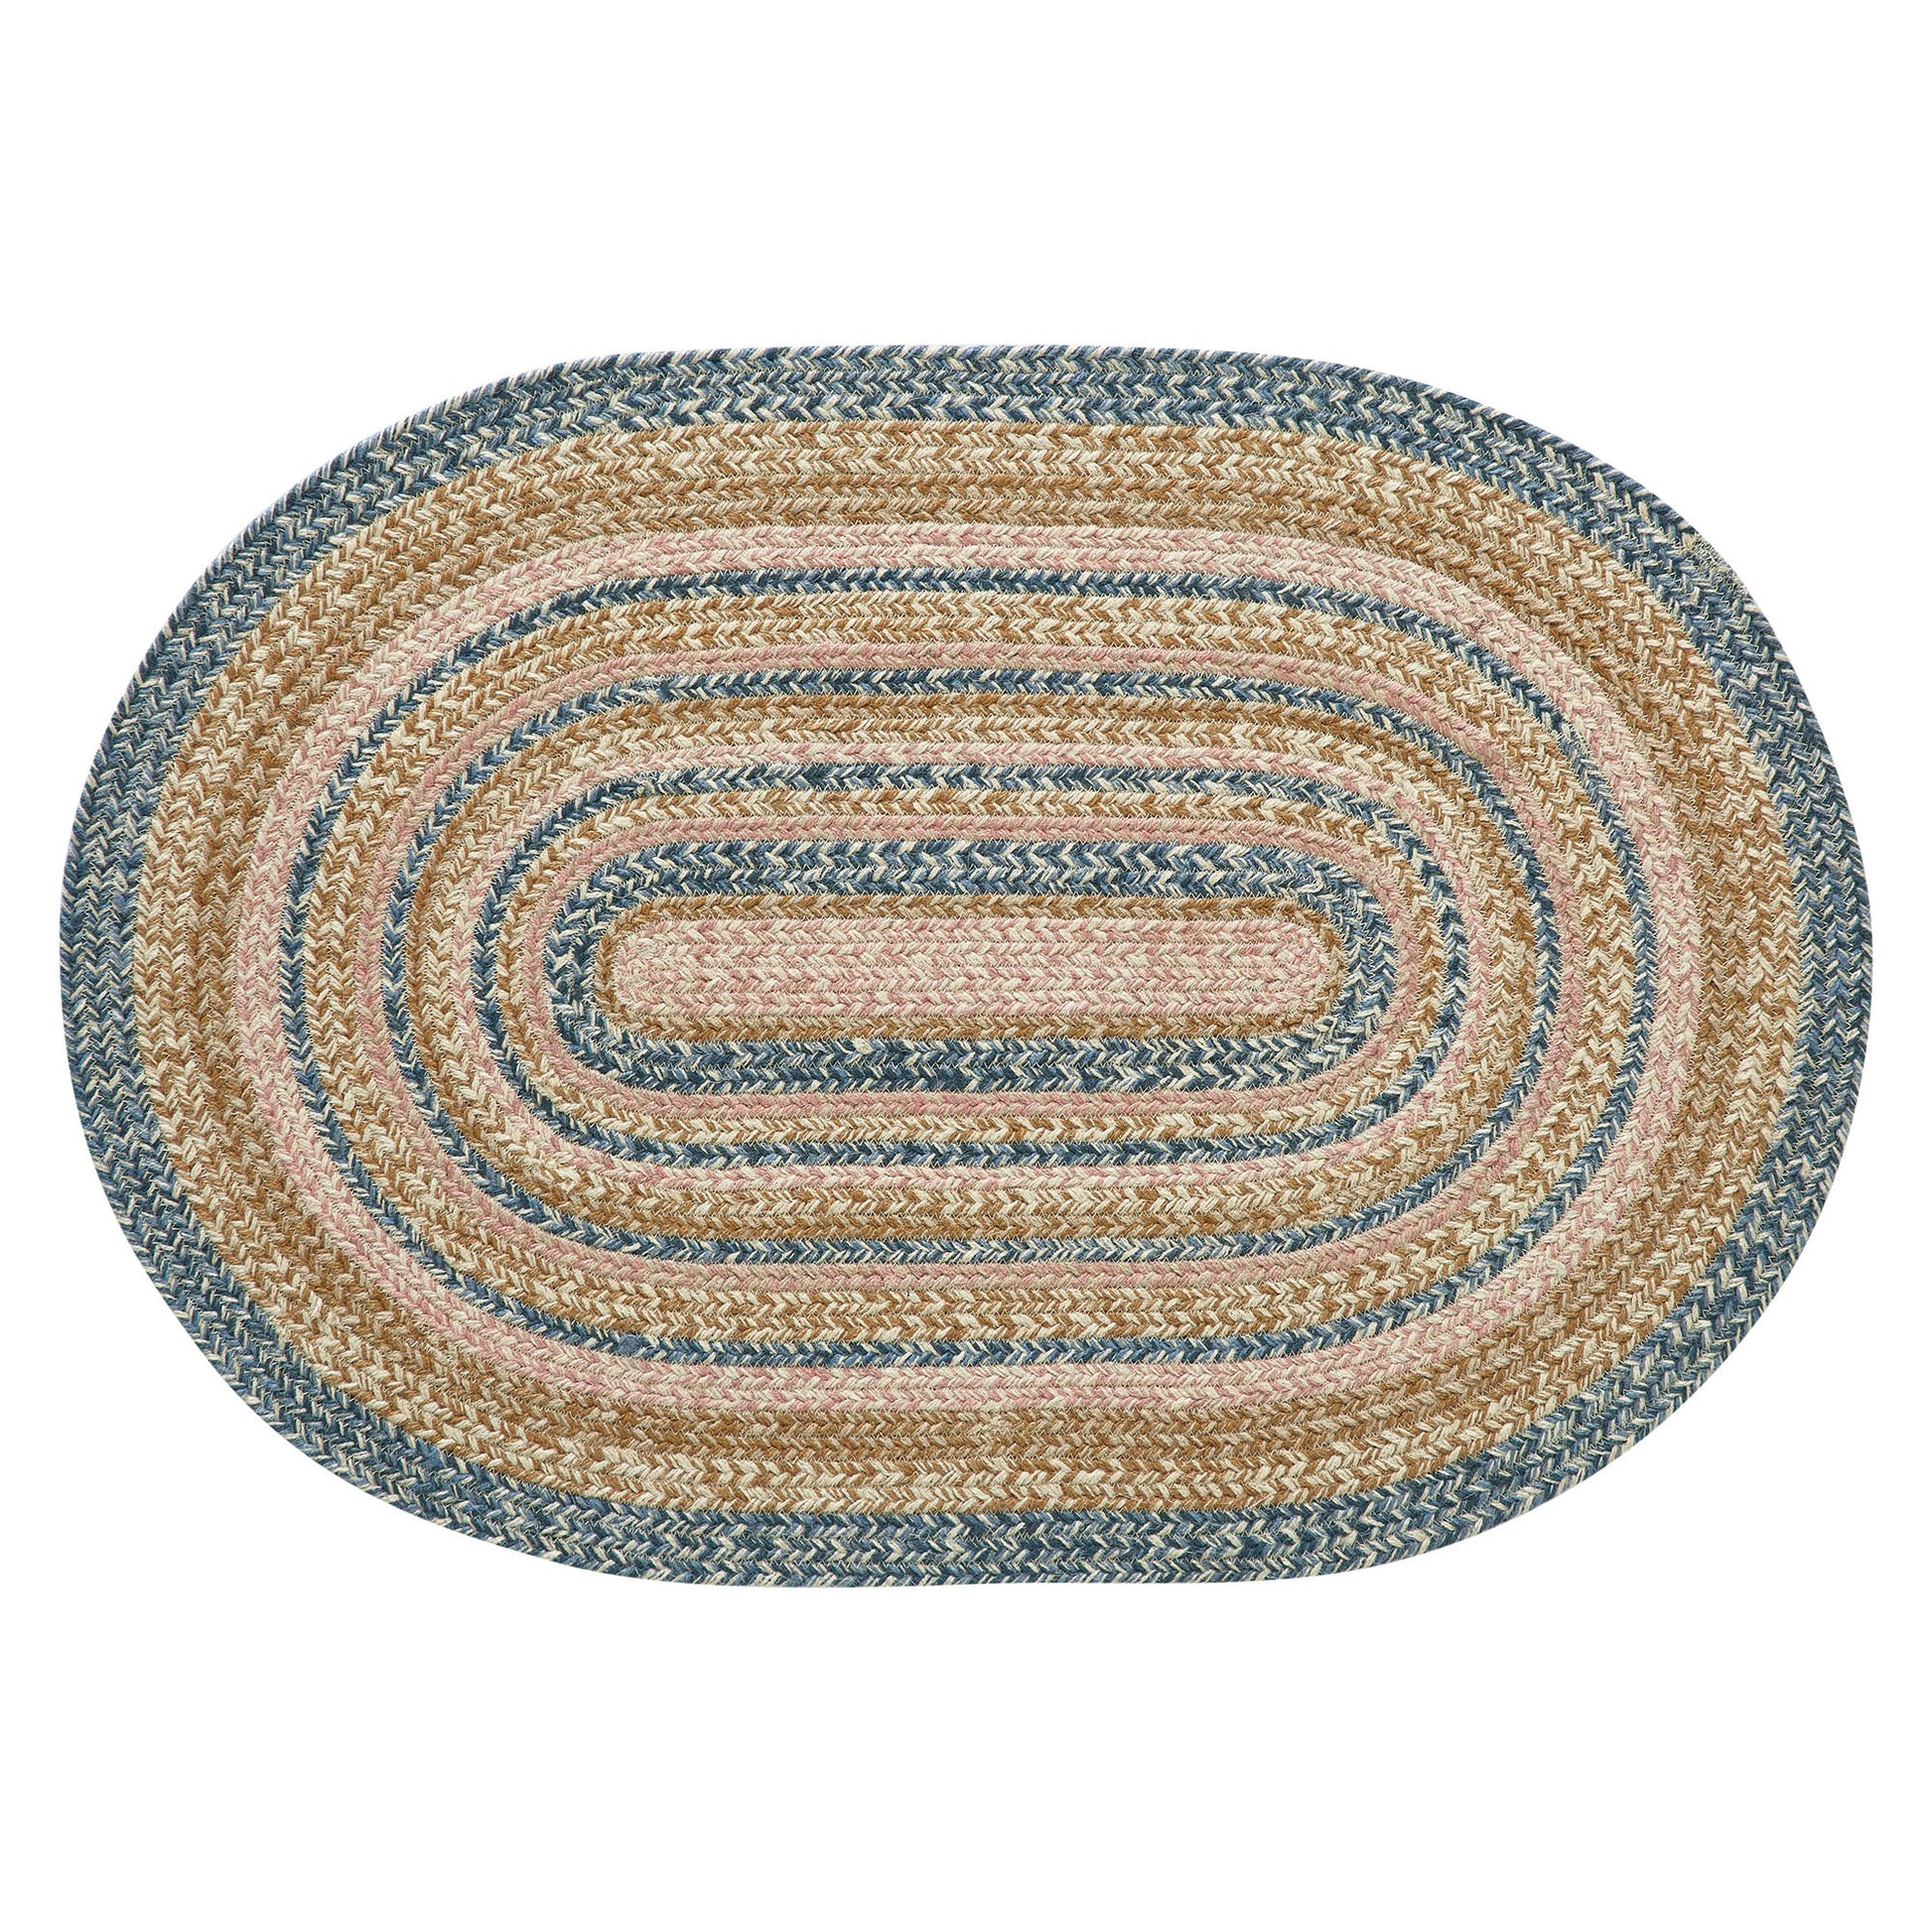 oval braided rug with colors of blue, gold, pink, and cream. 